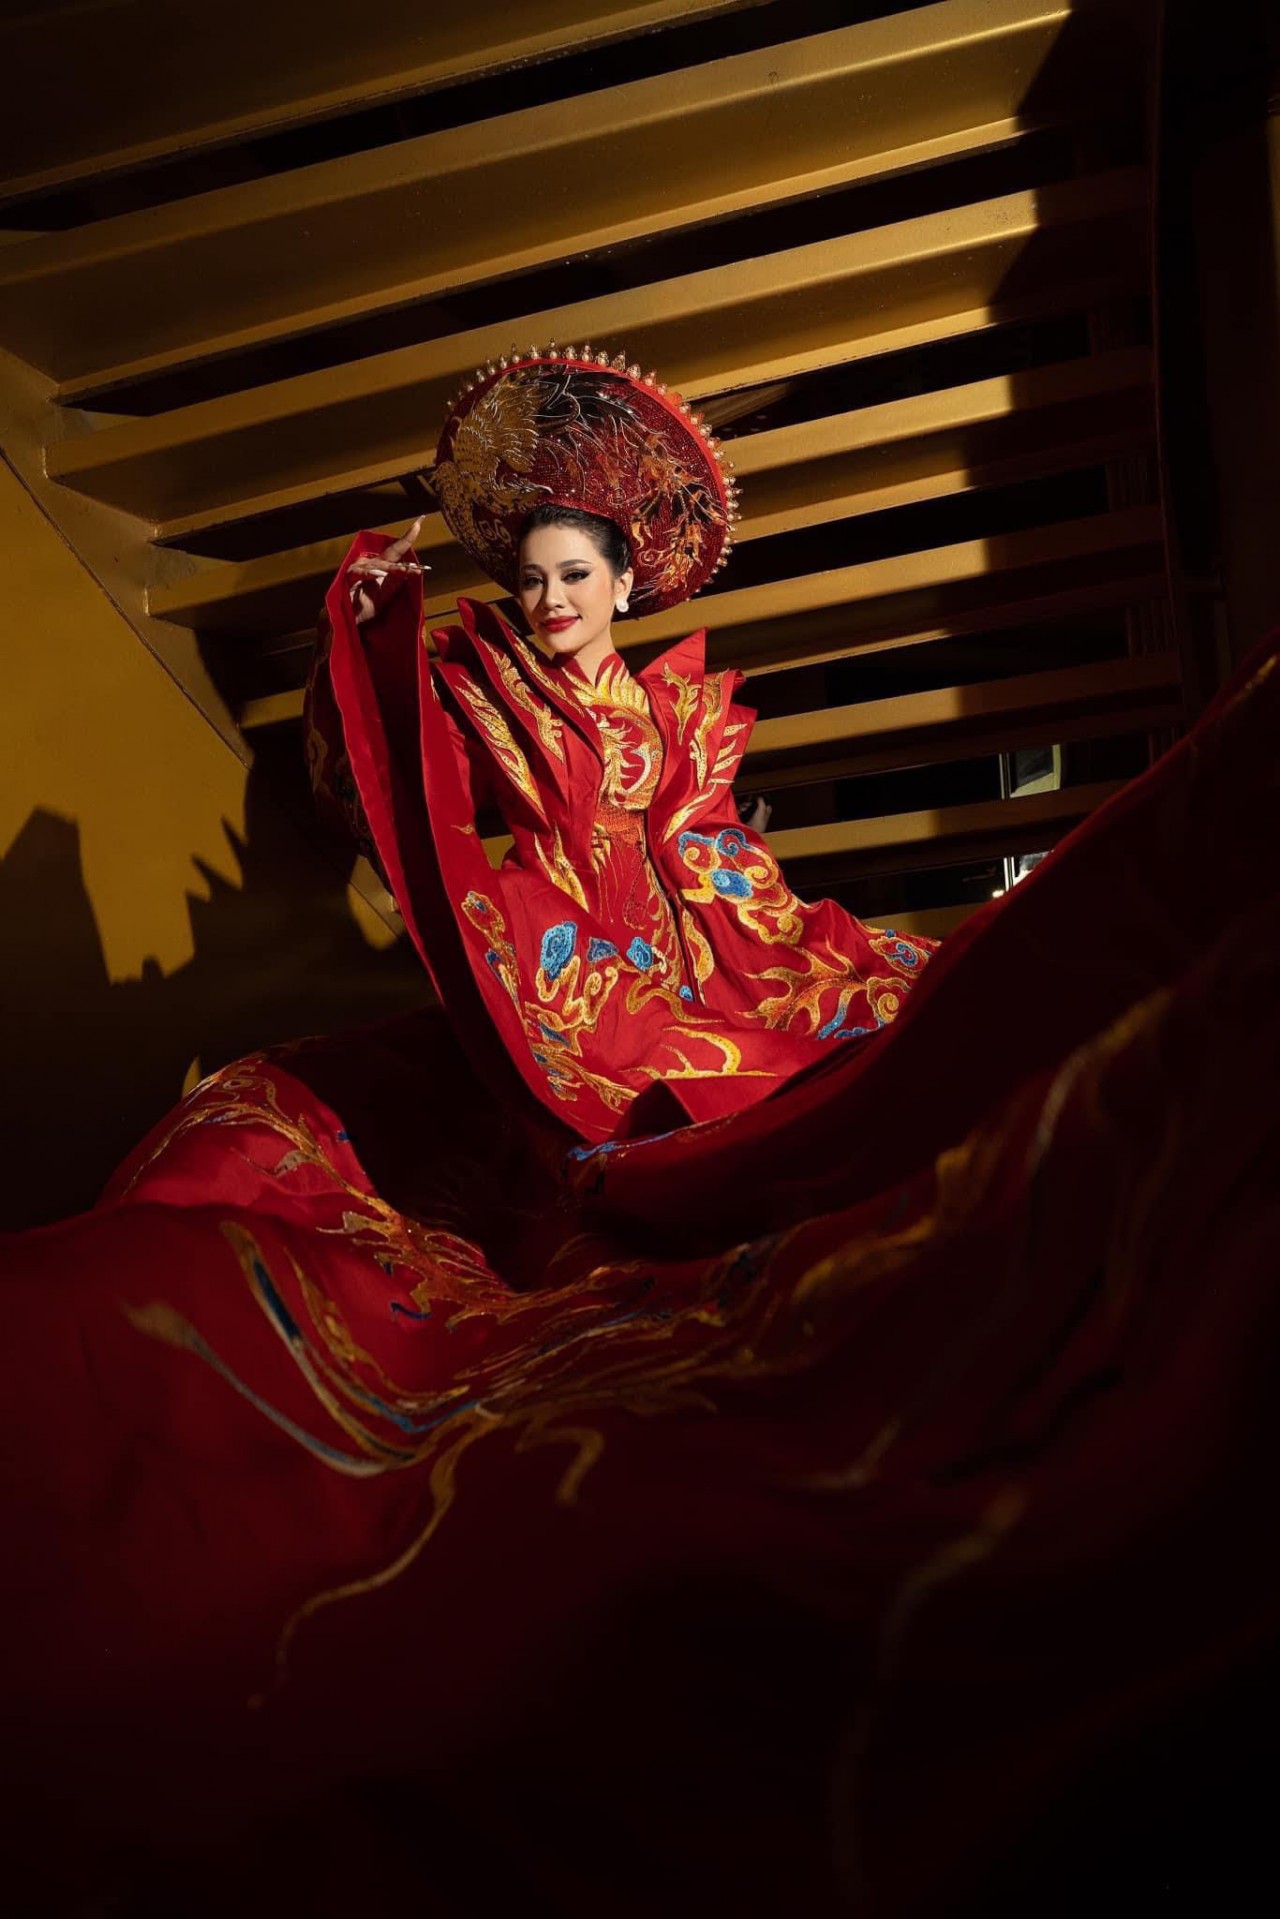 'Sacred Roots' – Ao Dai collection telling a story of Vietnam’s culture